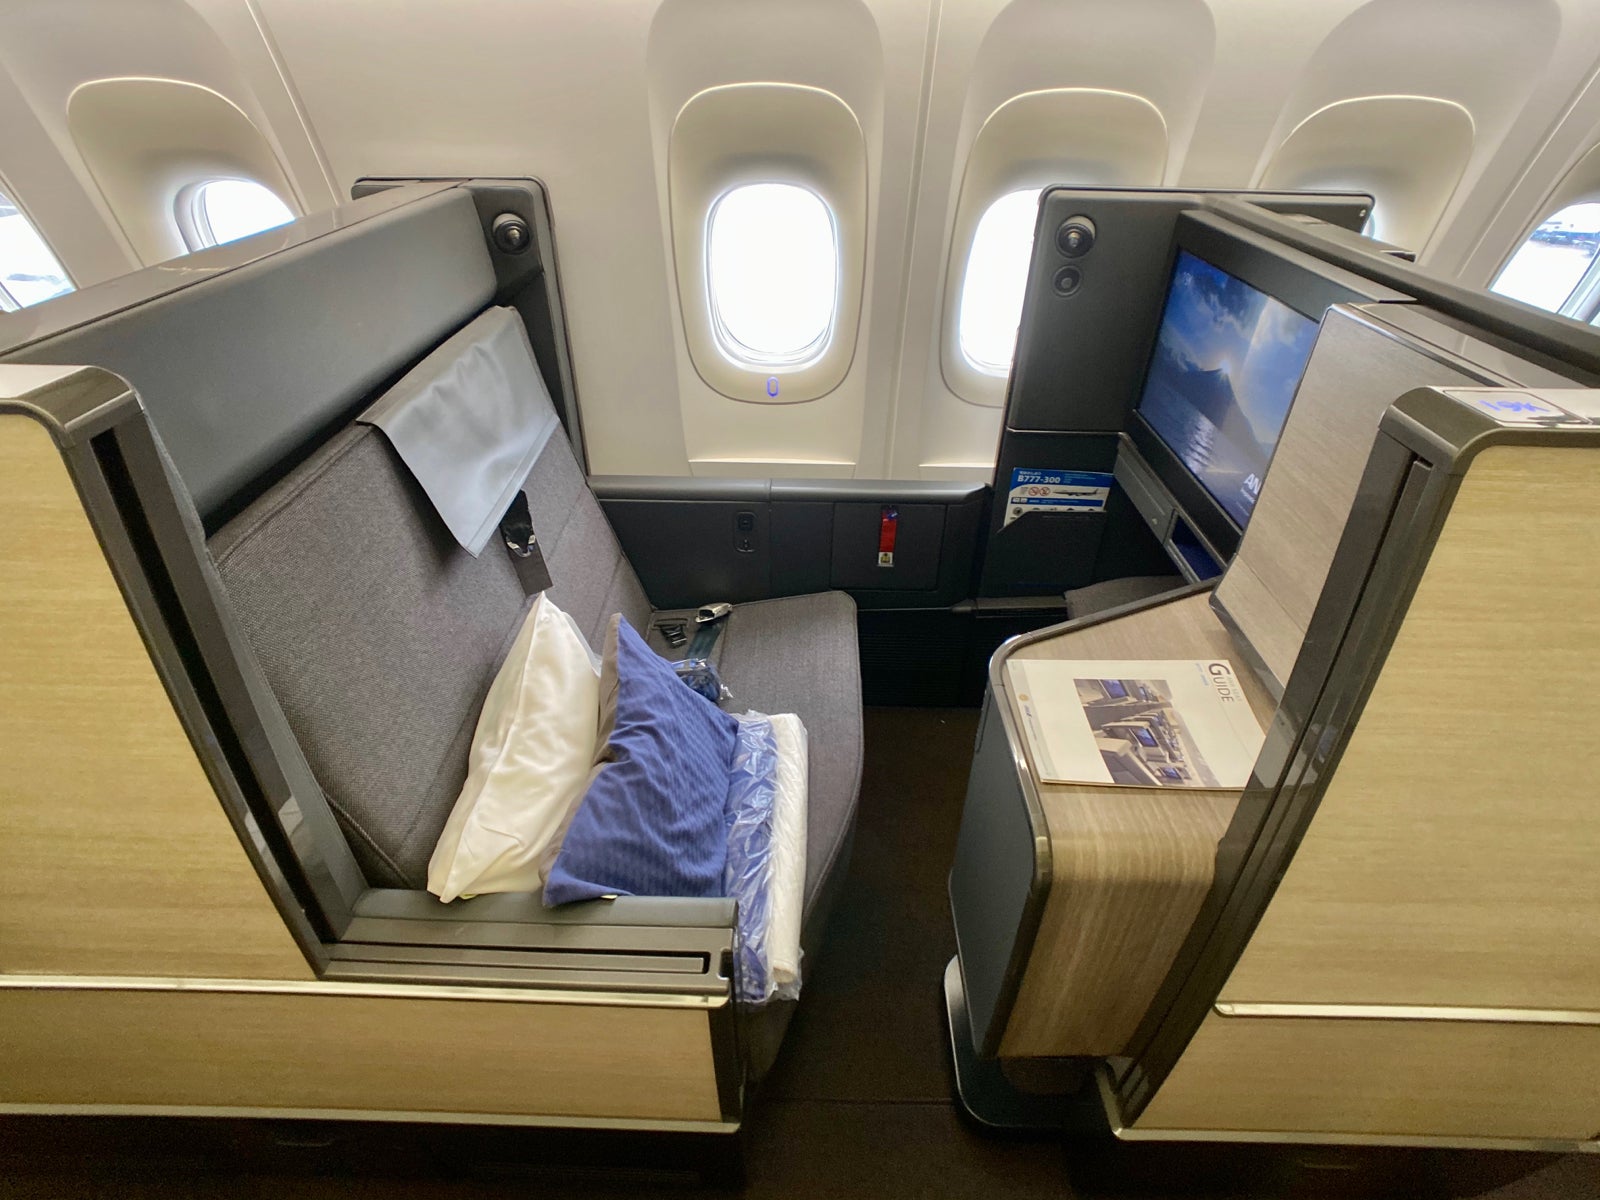 ANA_777_New_Business_Class_The_Room_Zach_Griff_ZGriff - 41